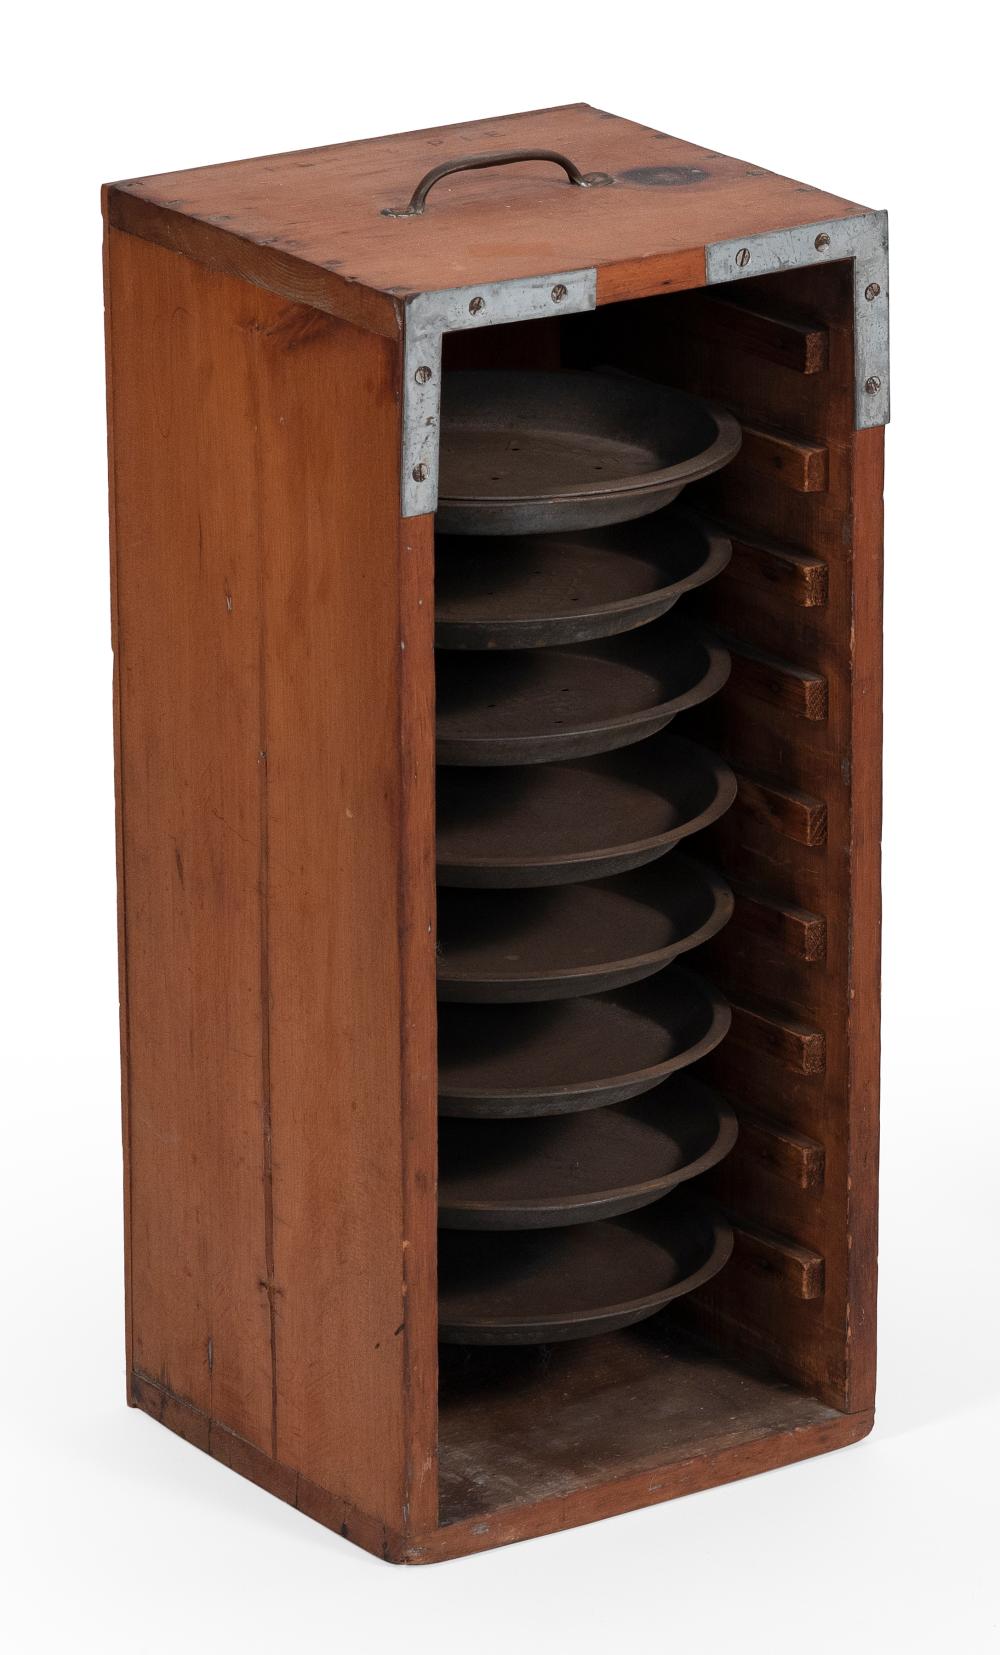  PERRY S PIES WOODEN PIE RACK 34c9a6